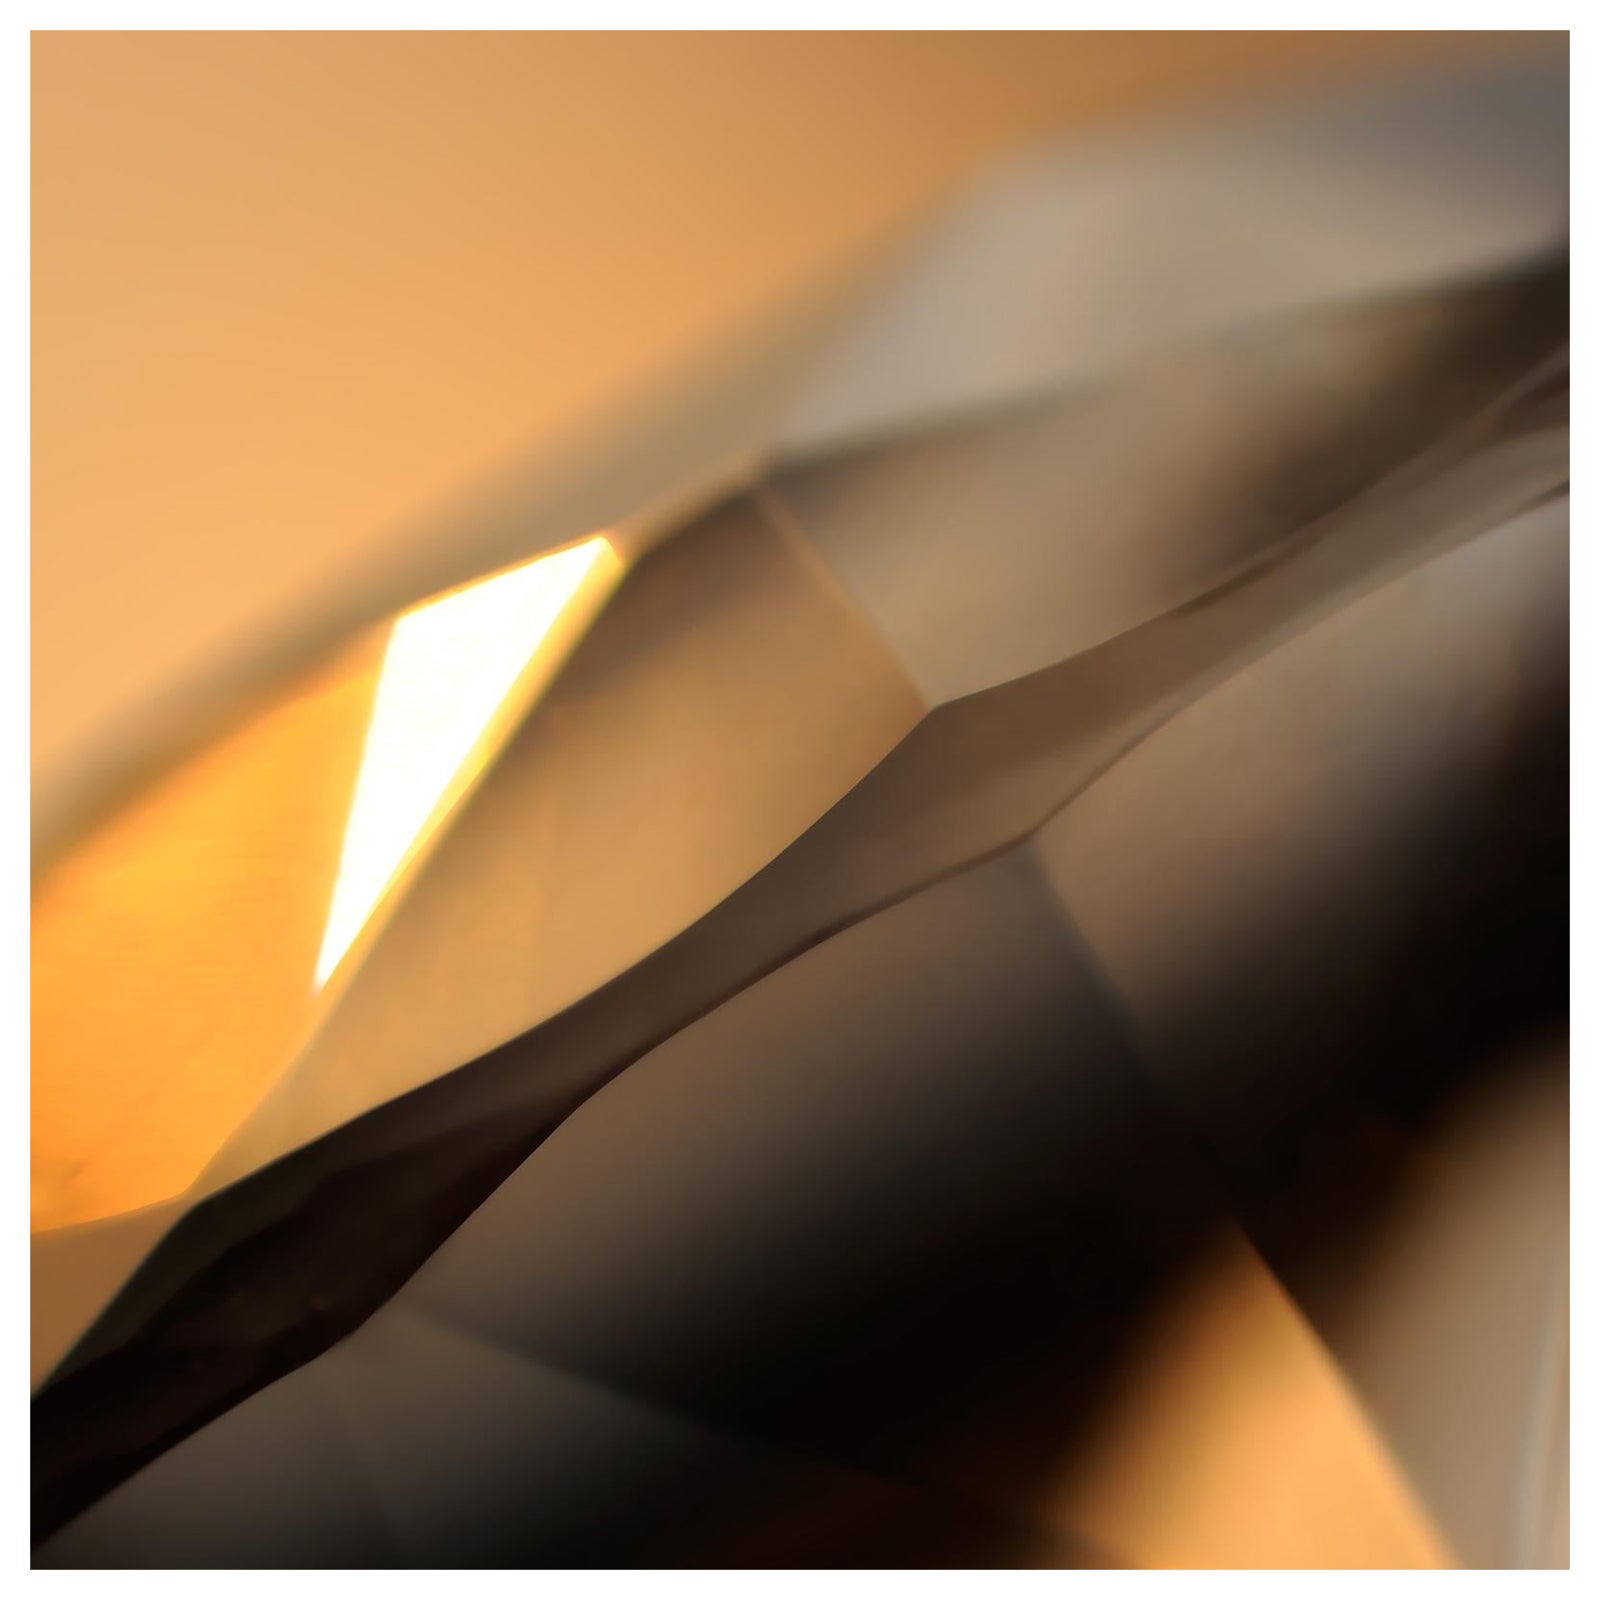 Bling 15 - FRee delivery- Yellow print, Color abstract, Square brown photo